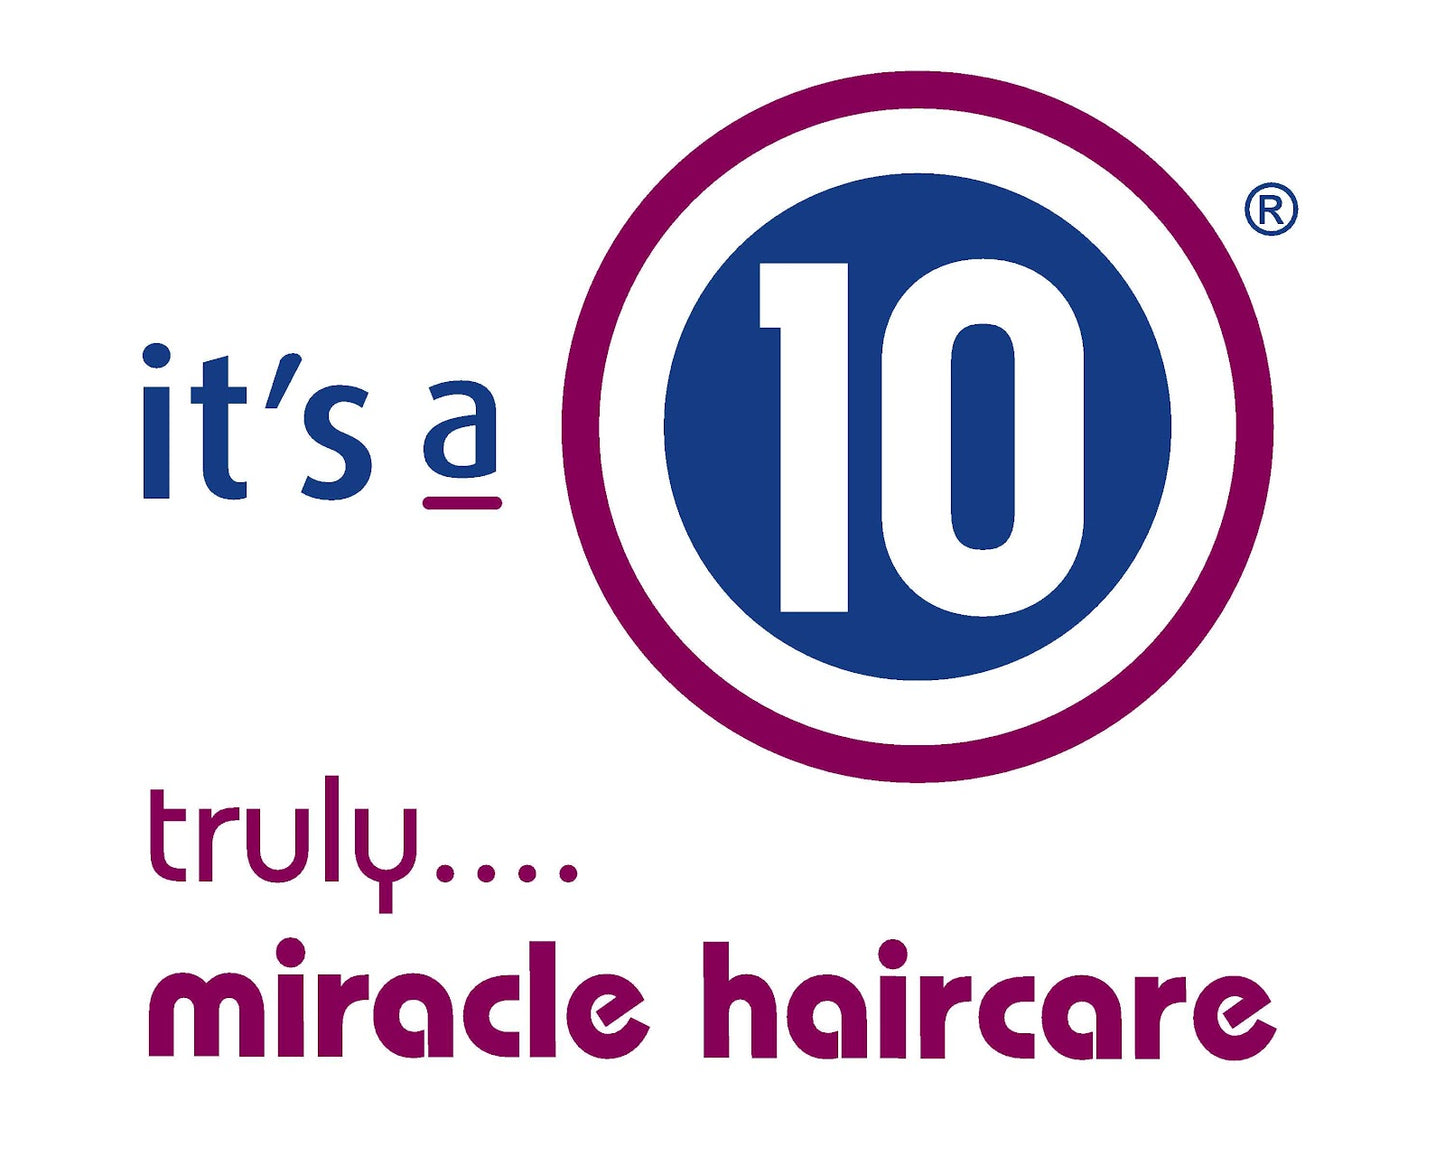 It's A 10 Miracle Finishing Spray 10 Oz